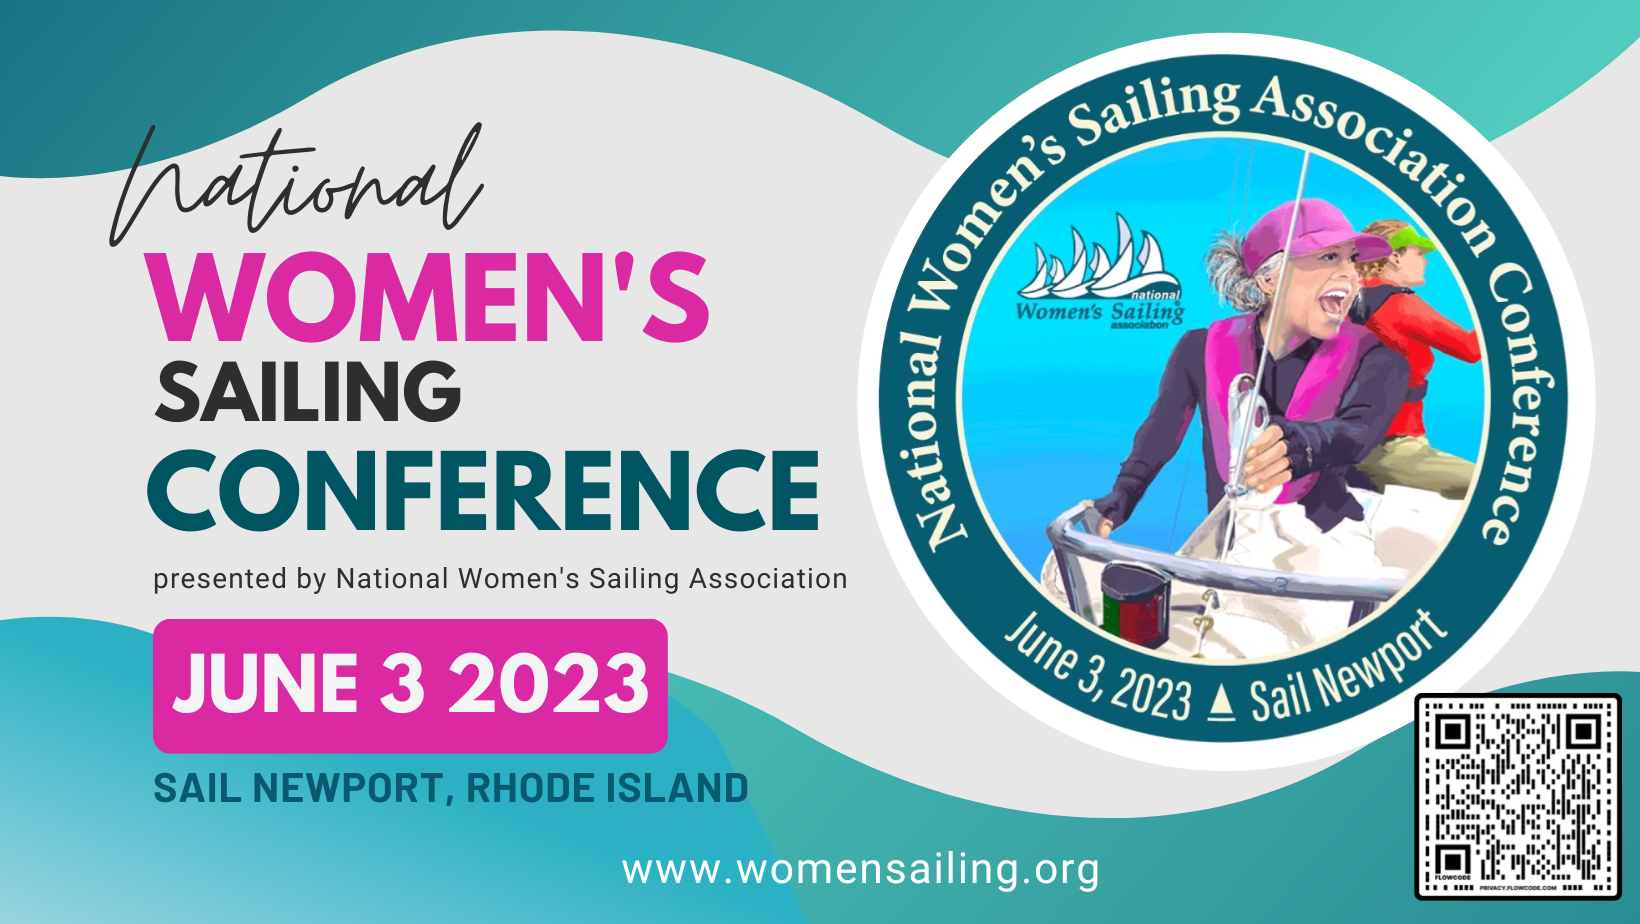 EARLY BIRD Conference Discount for NWSA Members